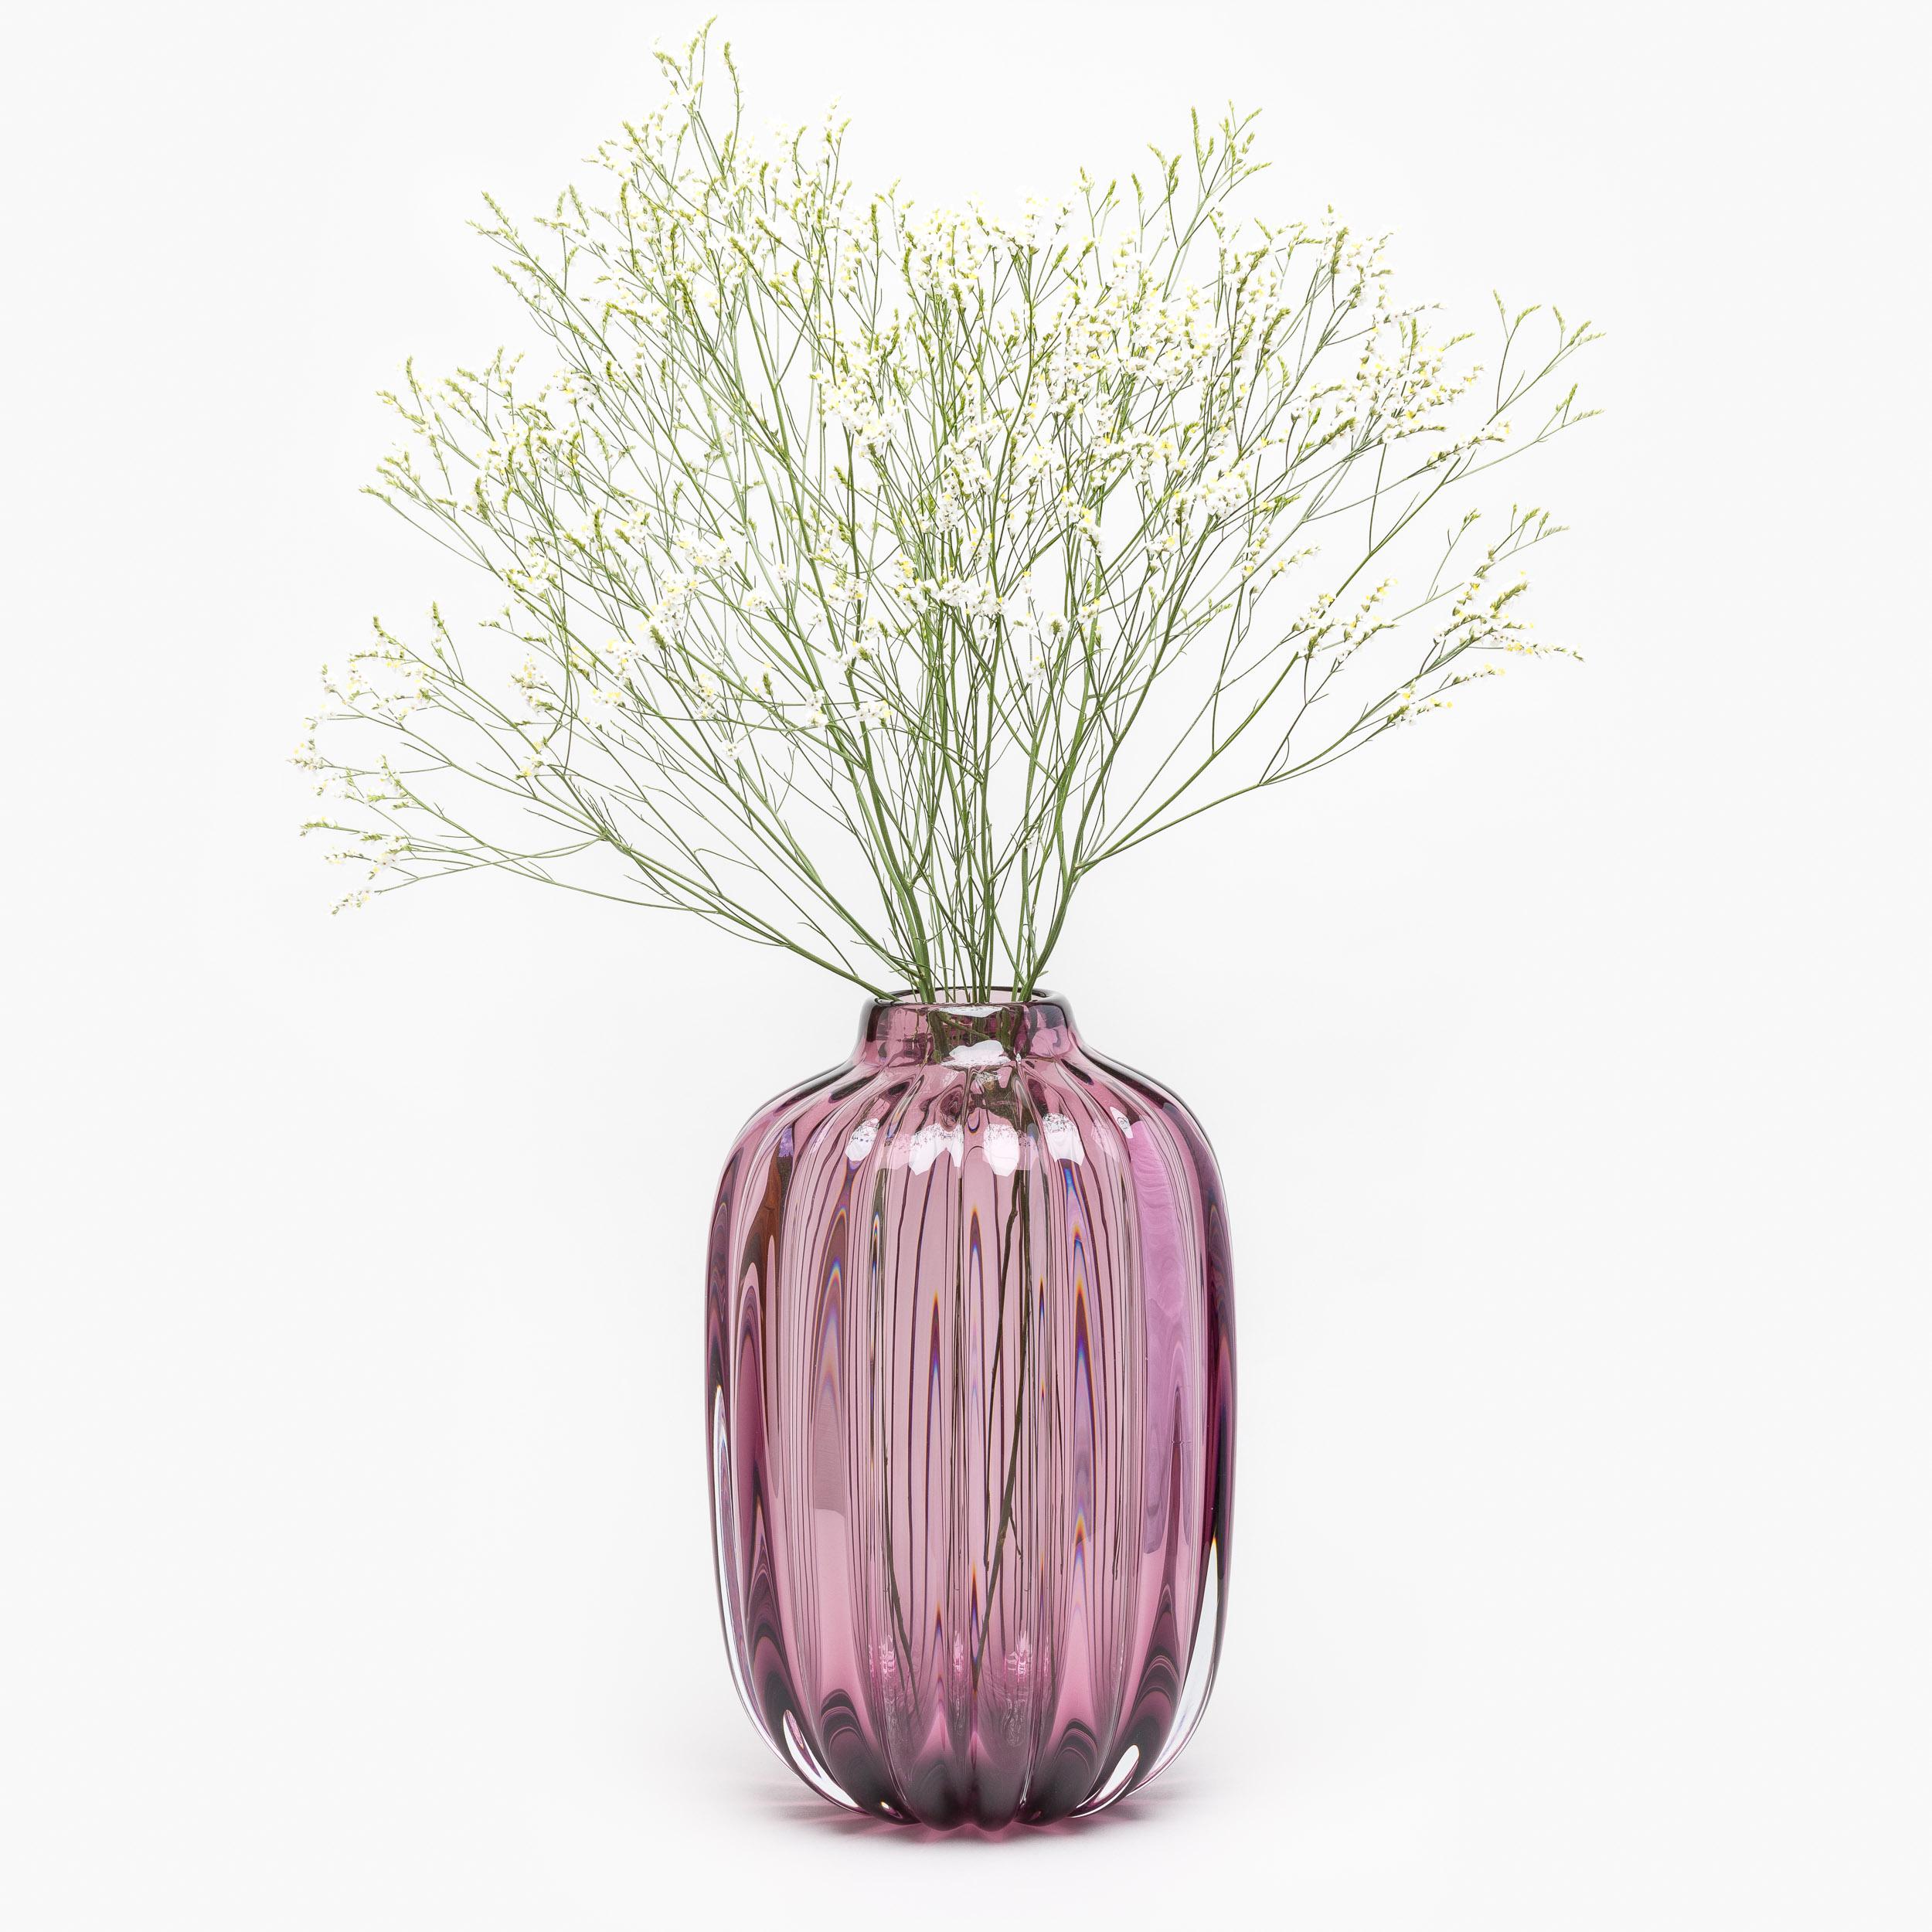 Inspired by the shape and proportions of vintage storage jars, the Fiori Jar vase requires many strong and skillful hands to produce. A heavy portion of molten glass is worked into shape before being mouth blown into an iron mold to produce